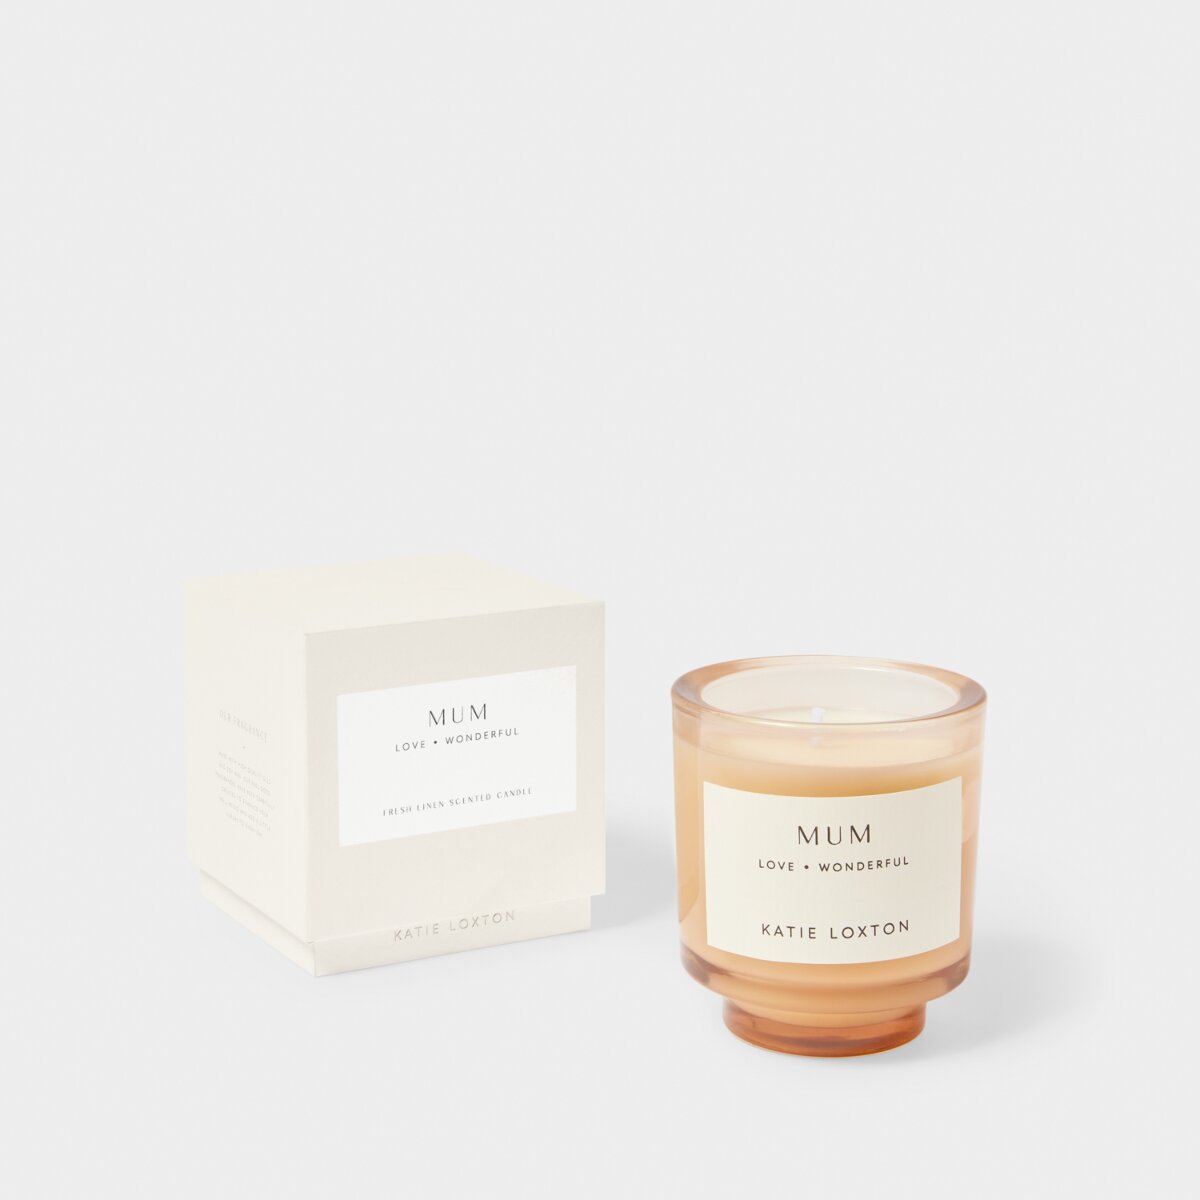 KATIE LOXTON | SENTIMENT CANDLE | MUM | FRESH LINEN AND WHITE LILY